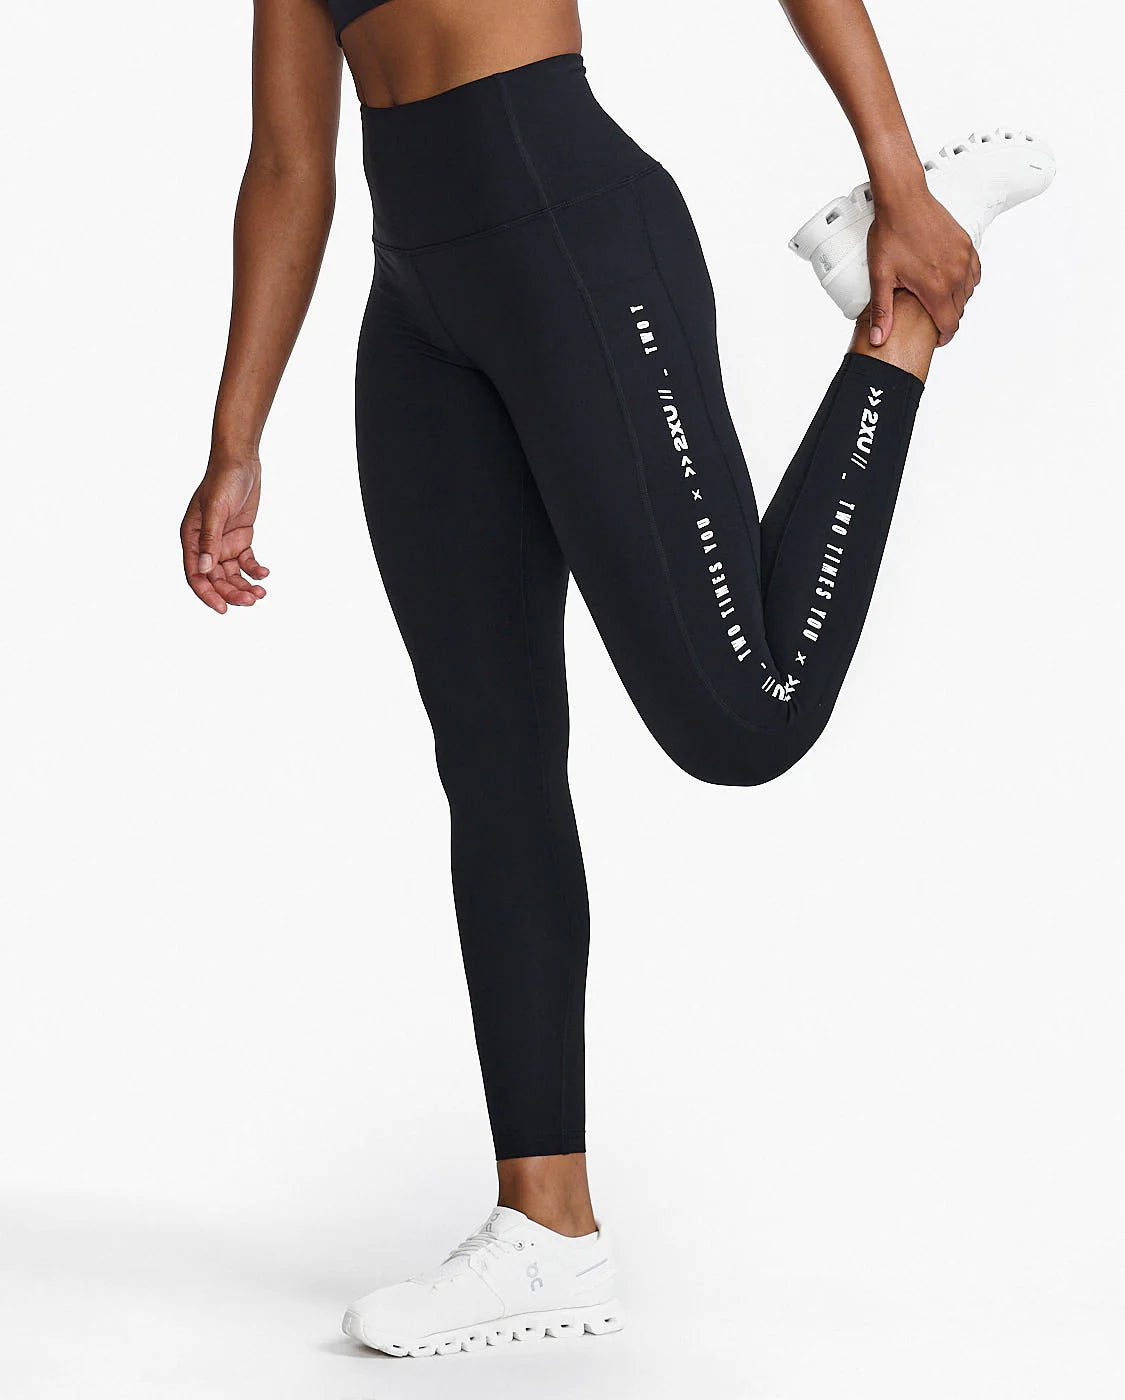 2XU COMPRESSION TIGHTS REVIEW: 2XU's Running Tights Are Designed